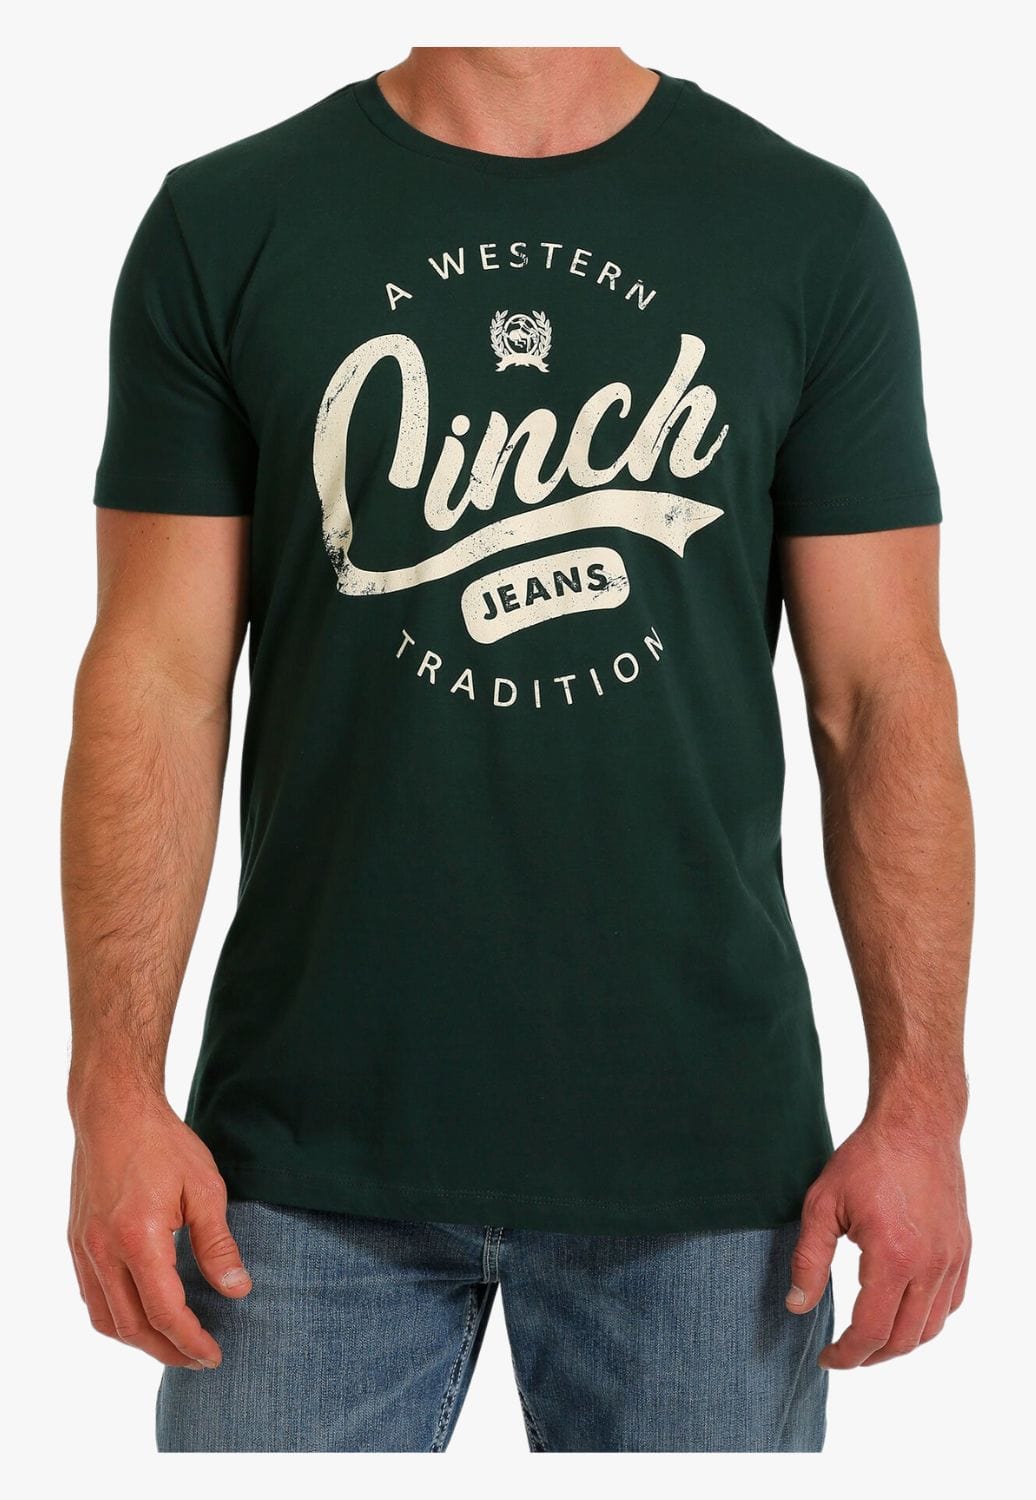 Cinch CLOTHING-MensT-Shirts Cinch Mens Cinch Jeans A Western Tradition T-Shirt